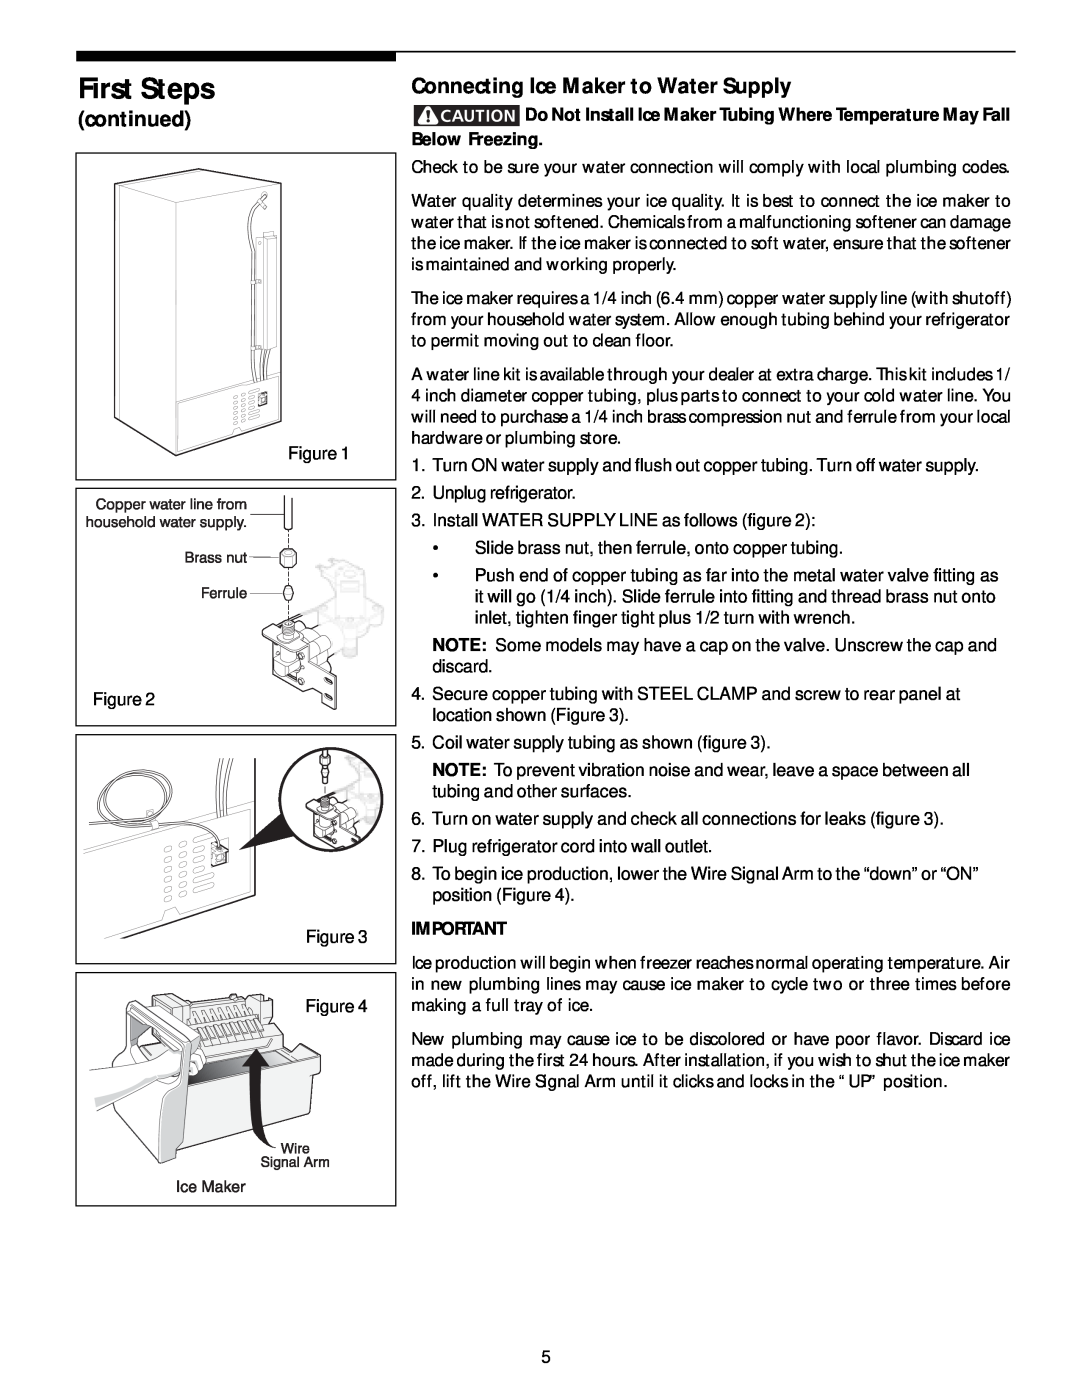 White-Westinghouse 218954301 manual continued, Connecting Ice Maker to Water Supply, First Steps 